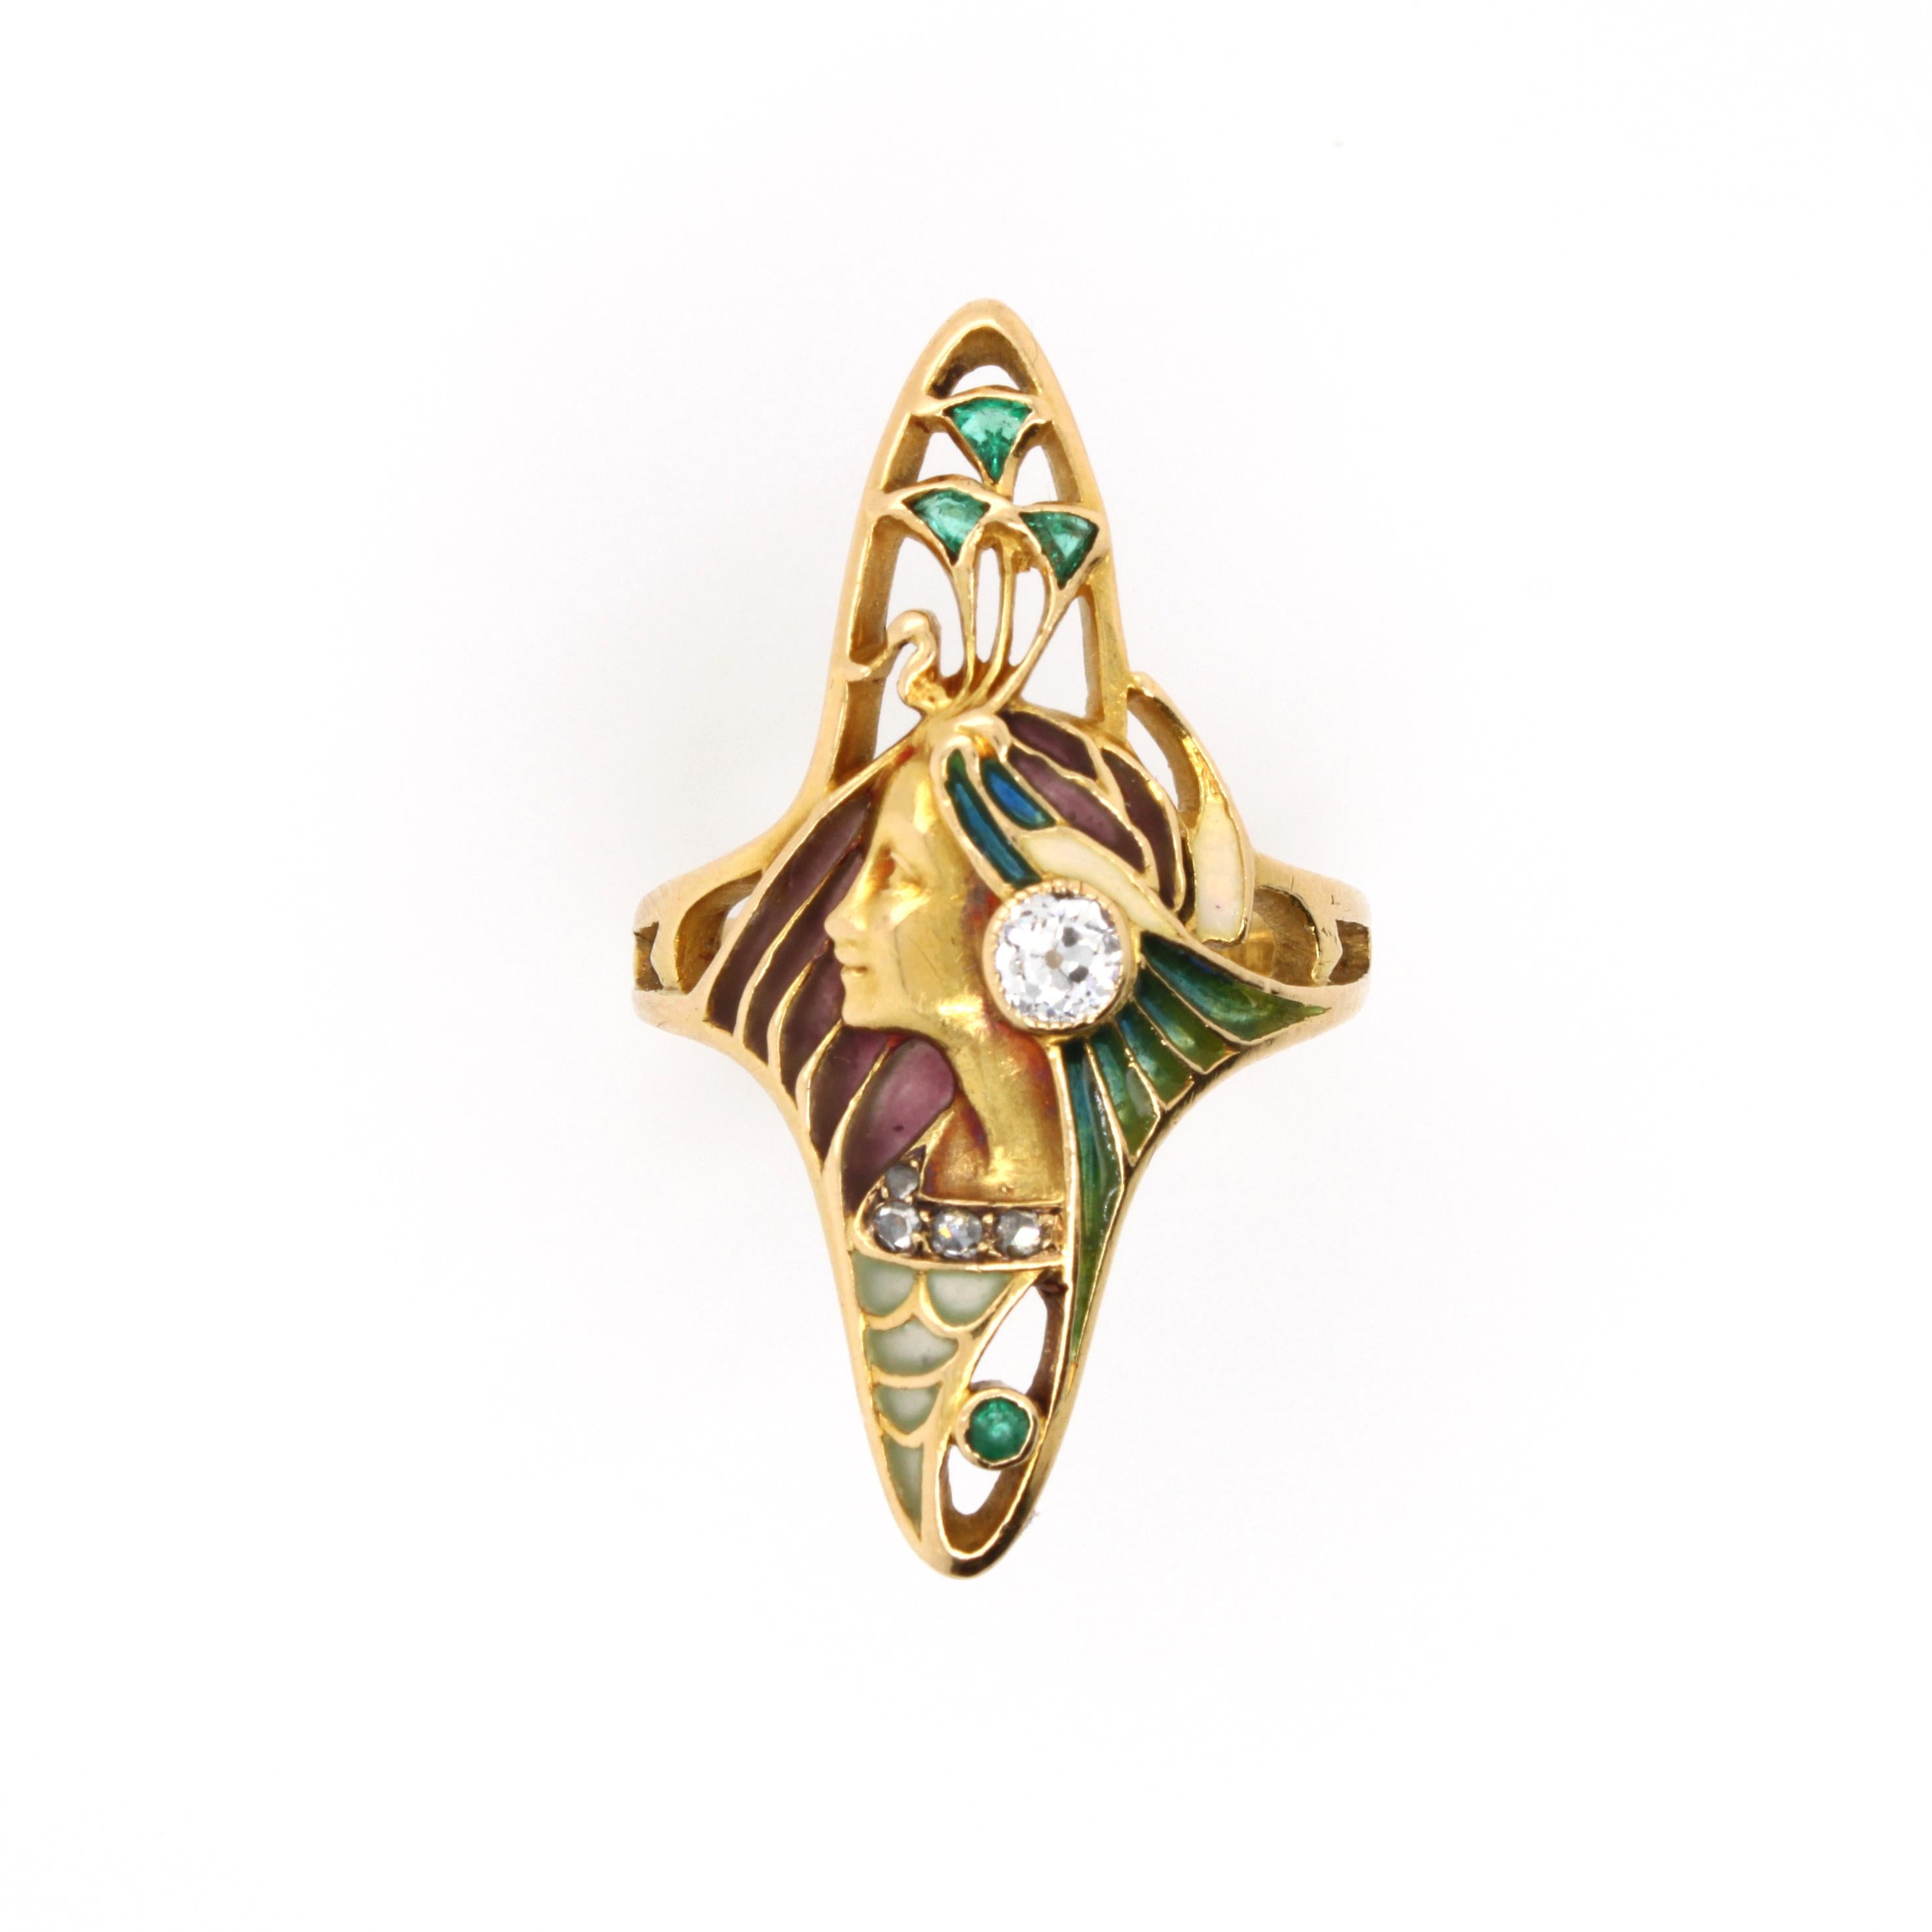 Rare Leopold Gautrait Art Nouveau Enamel and Gem-set Ring, ca. 1900

This exquisite Art Nouveau ring features the profile of a woman, wearing a peacock headdress, whose head feathers are depicted with emeralds. Furthermore the motif is swingfully